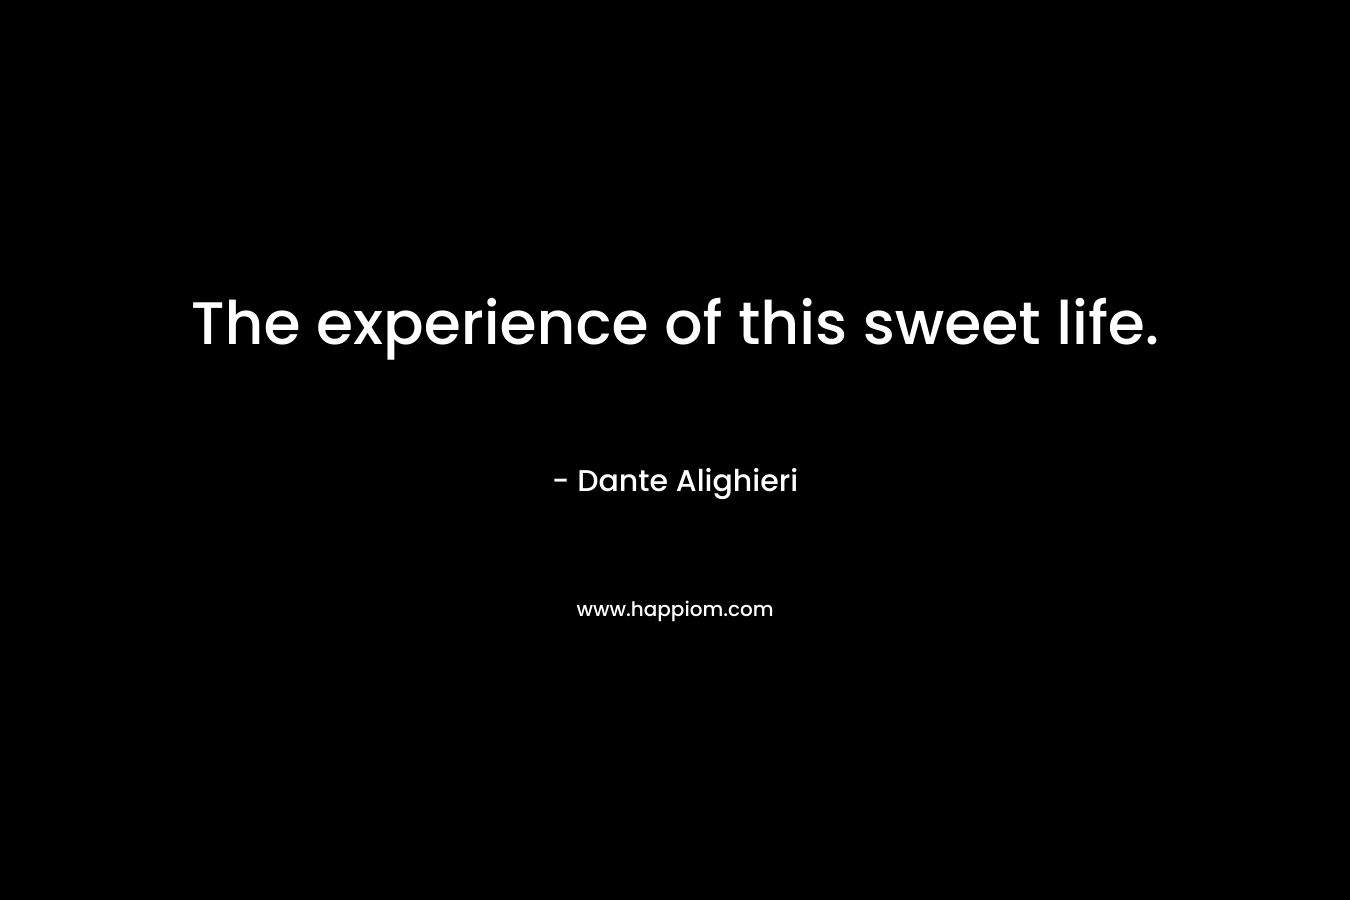 The experience of this sweet life.